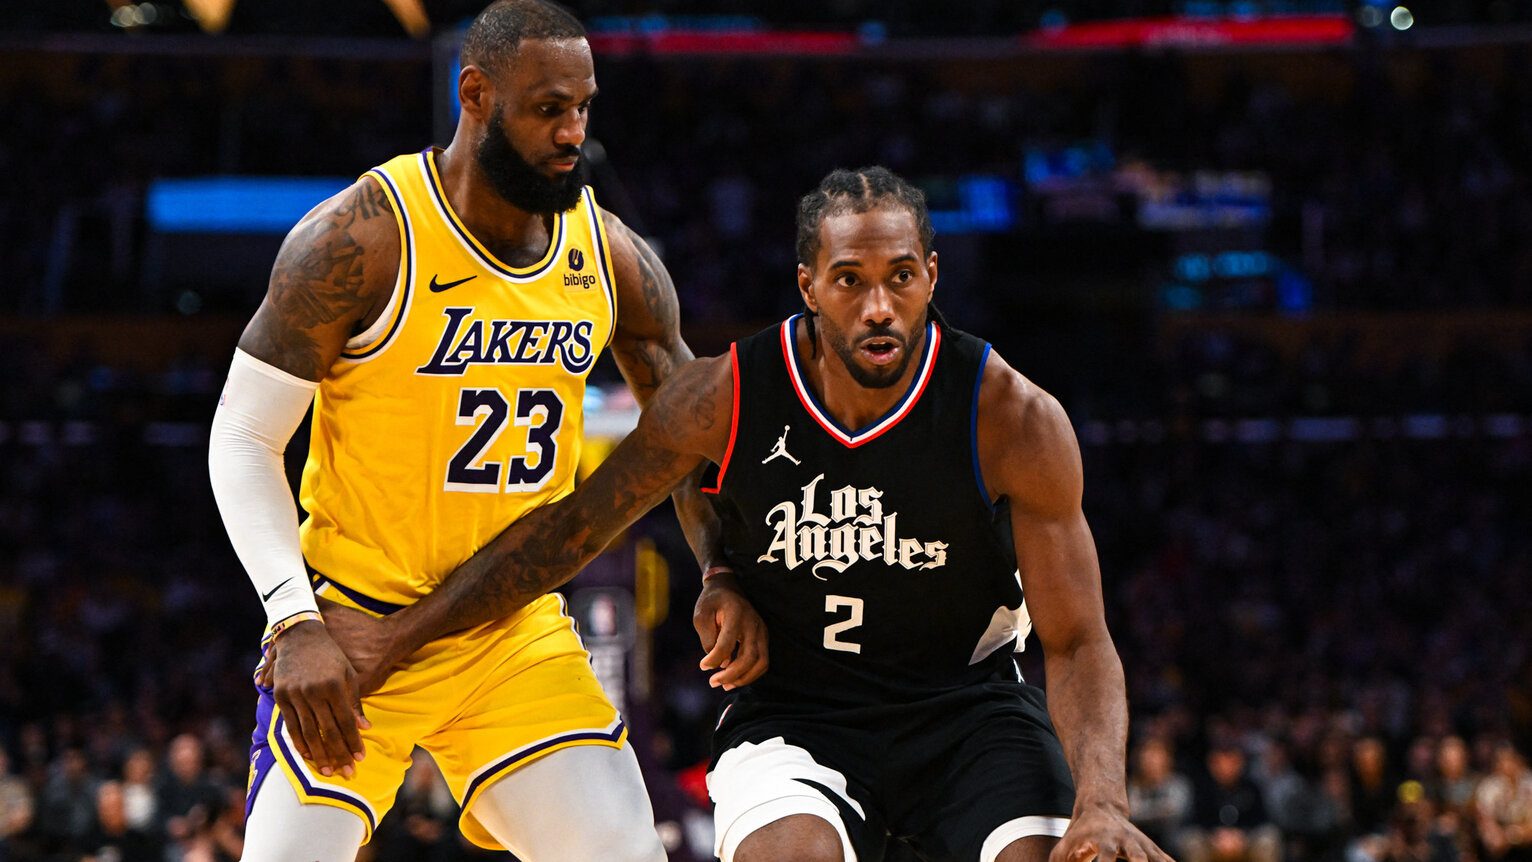 Lakers blow late lead, still beat Clippers in OT